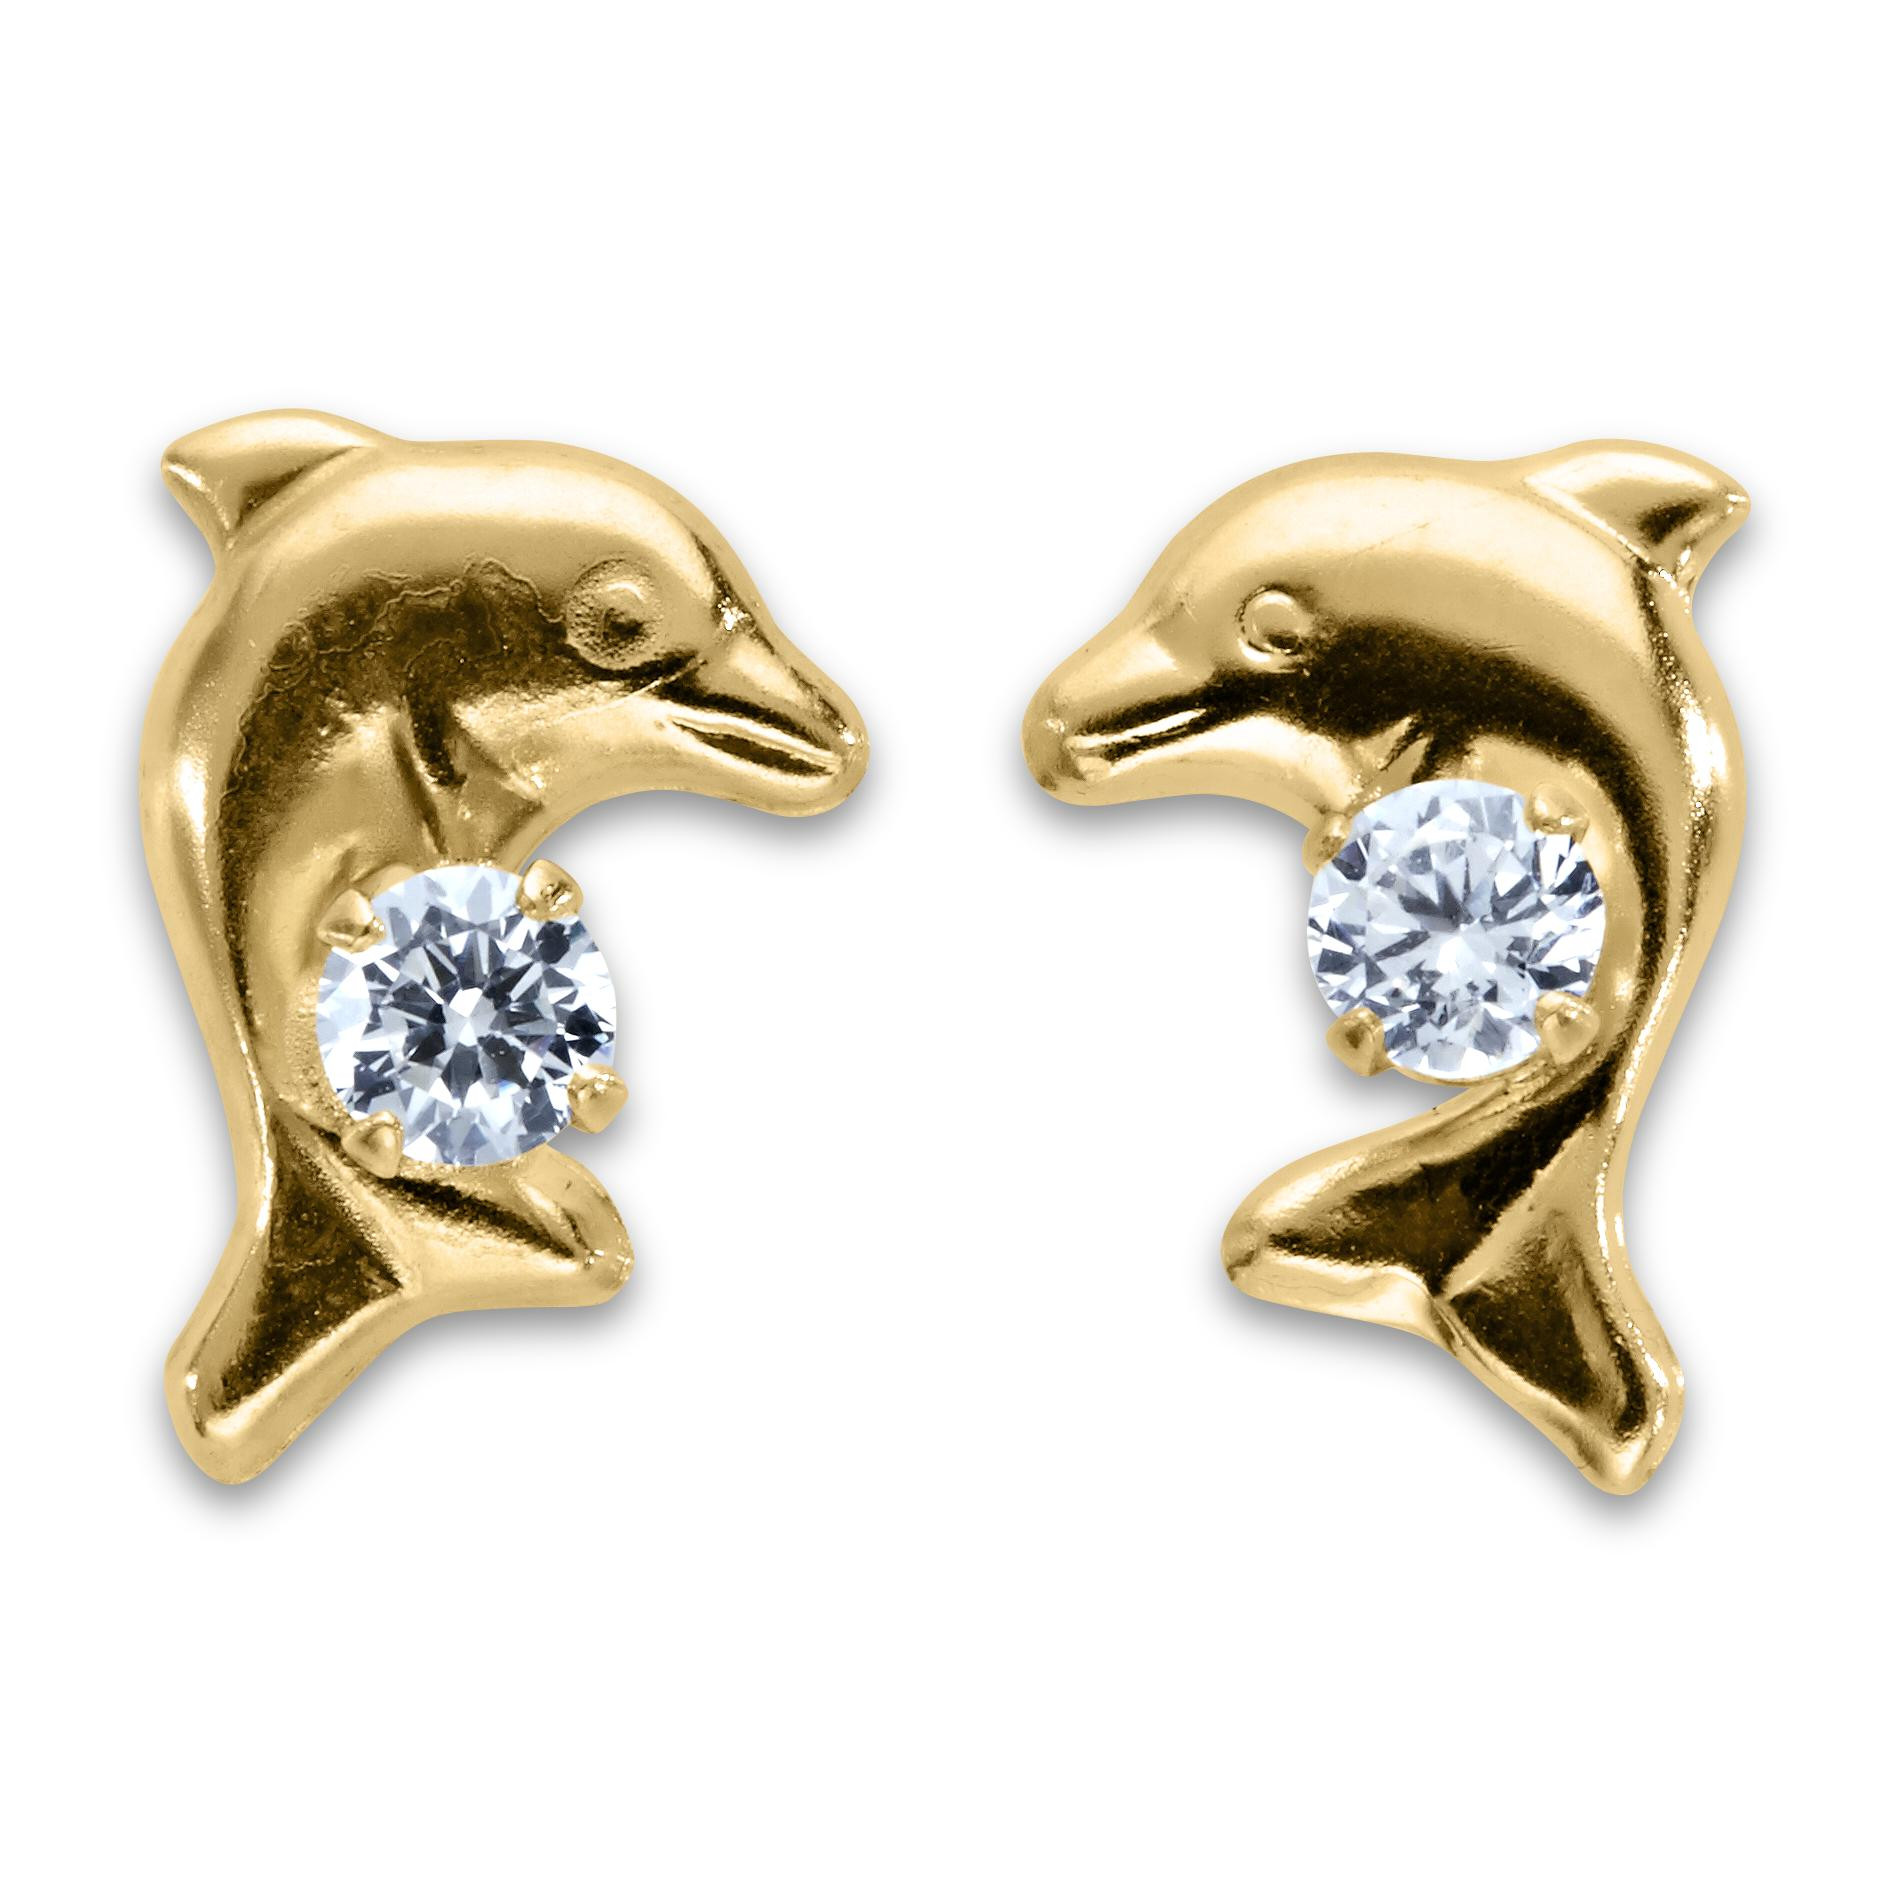 Gold Dolphin Earrings
 Girl s Round Cubic Zirconia 14k Yellow Gold Dolphin Post